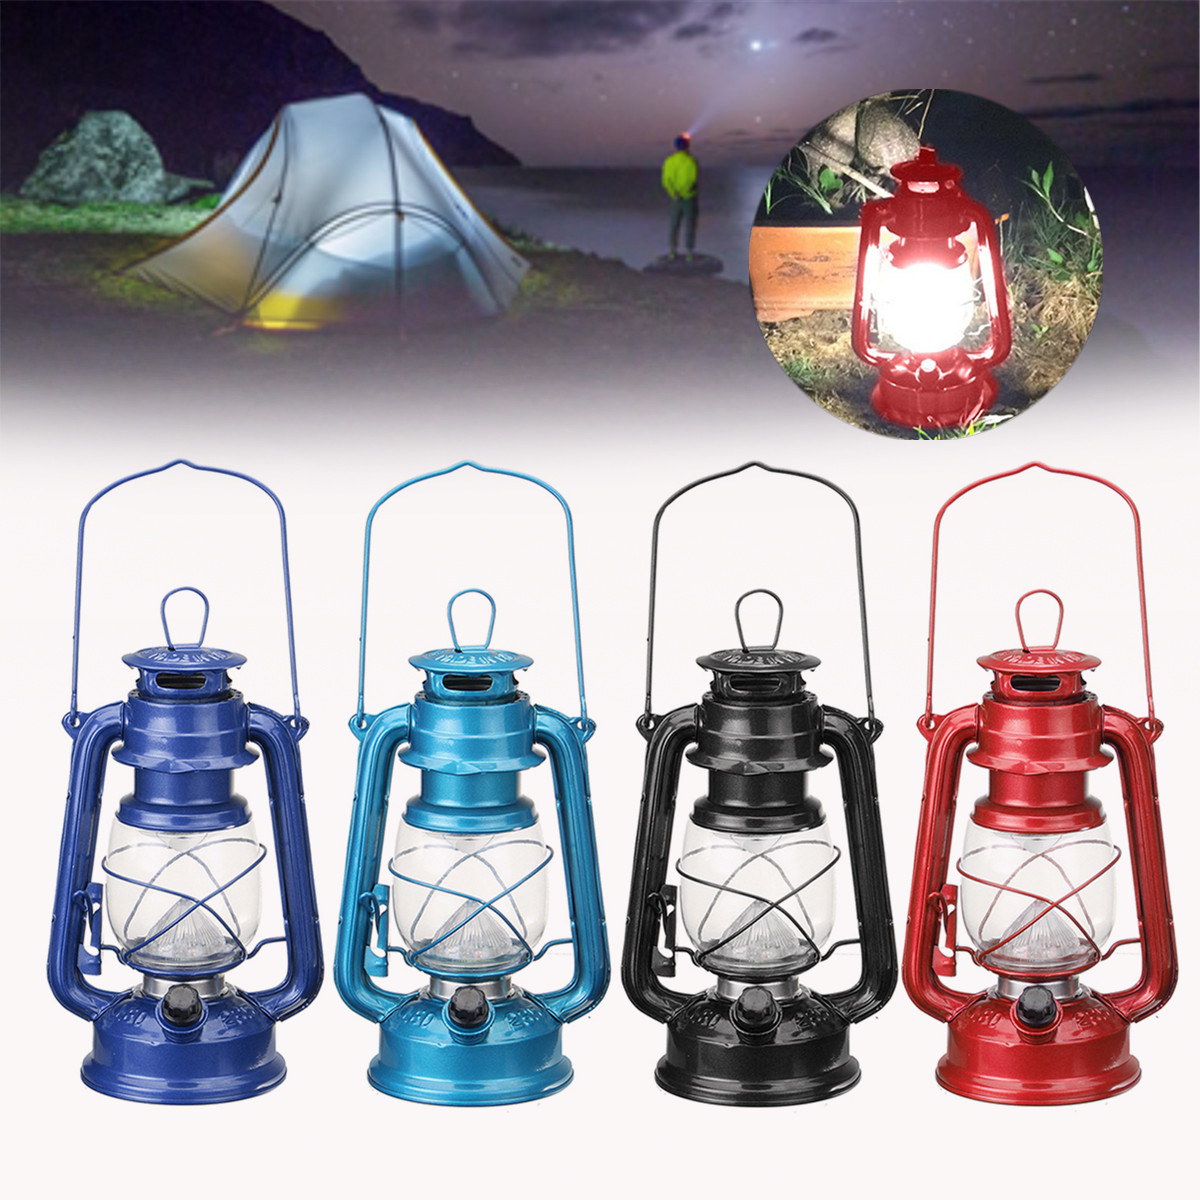 Vintage-Style-15-LED-Emergency-Light-Battery-Operated-Indoor-Outdoor-Camping-Fishing-Lantern-1223667-1